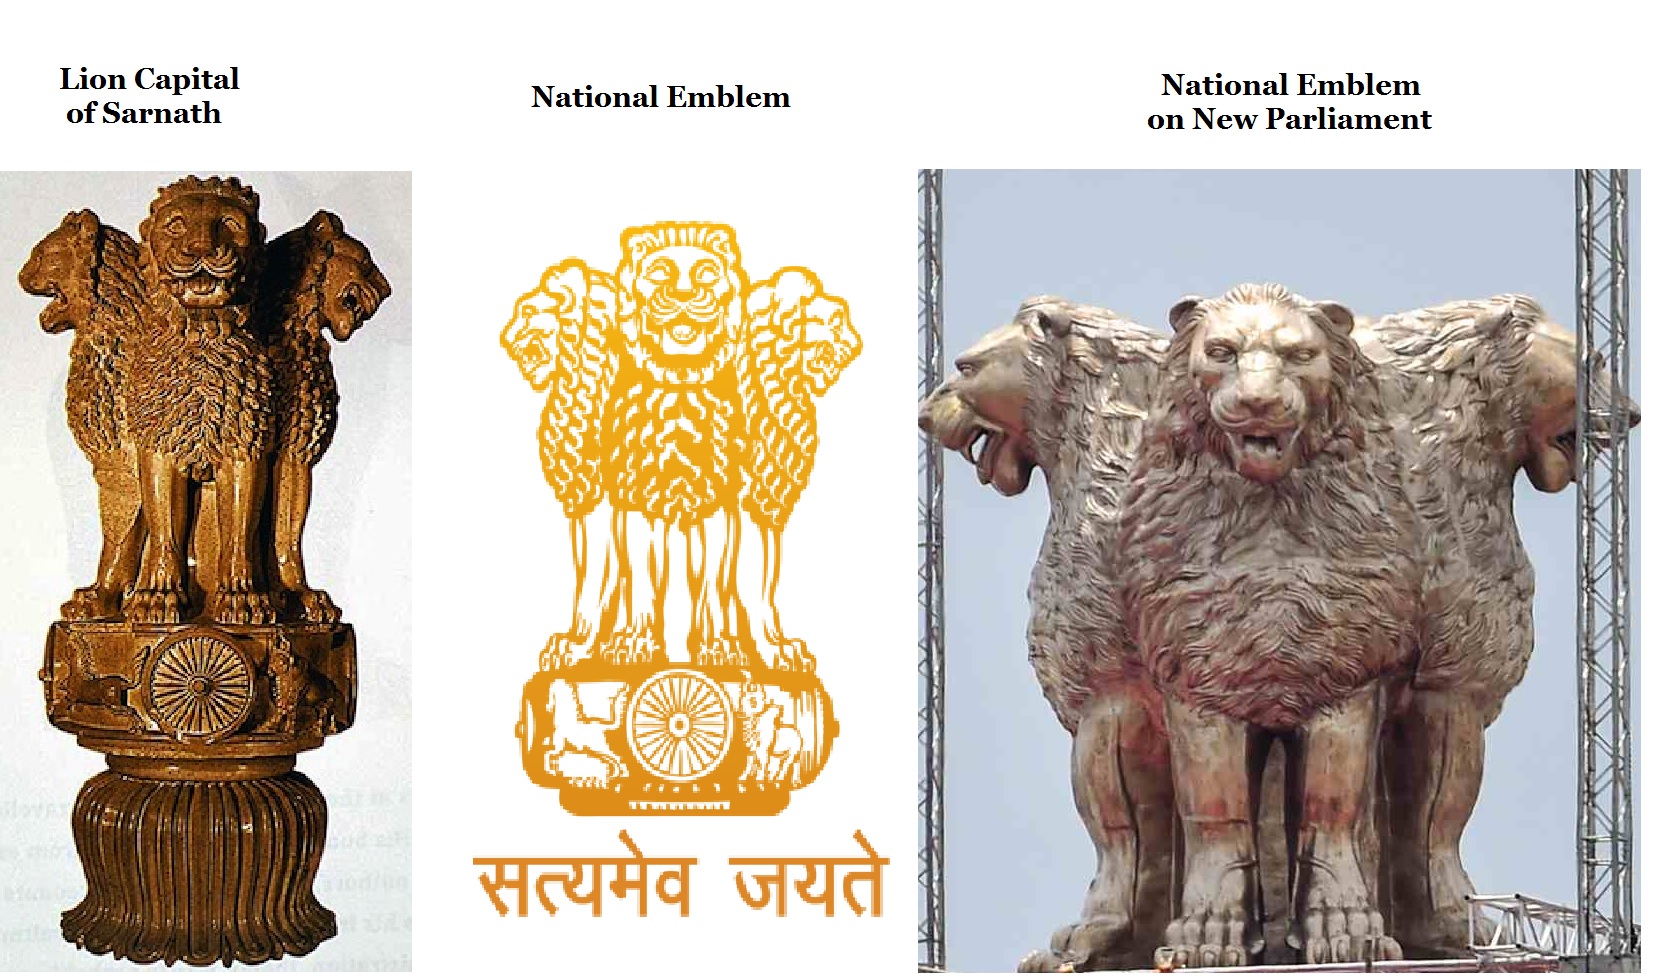 Outrage over new 'National Emblem' | GS II | Current Affairs